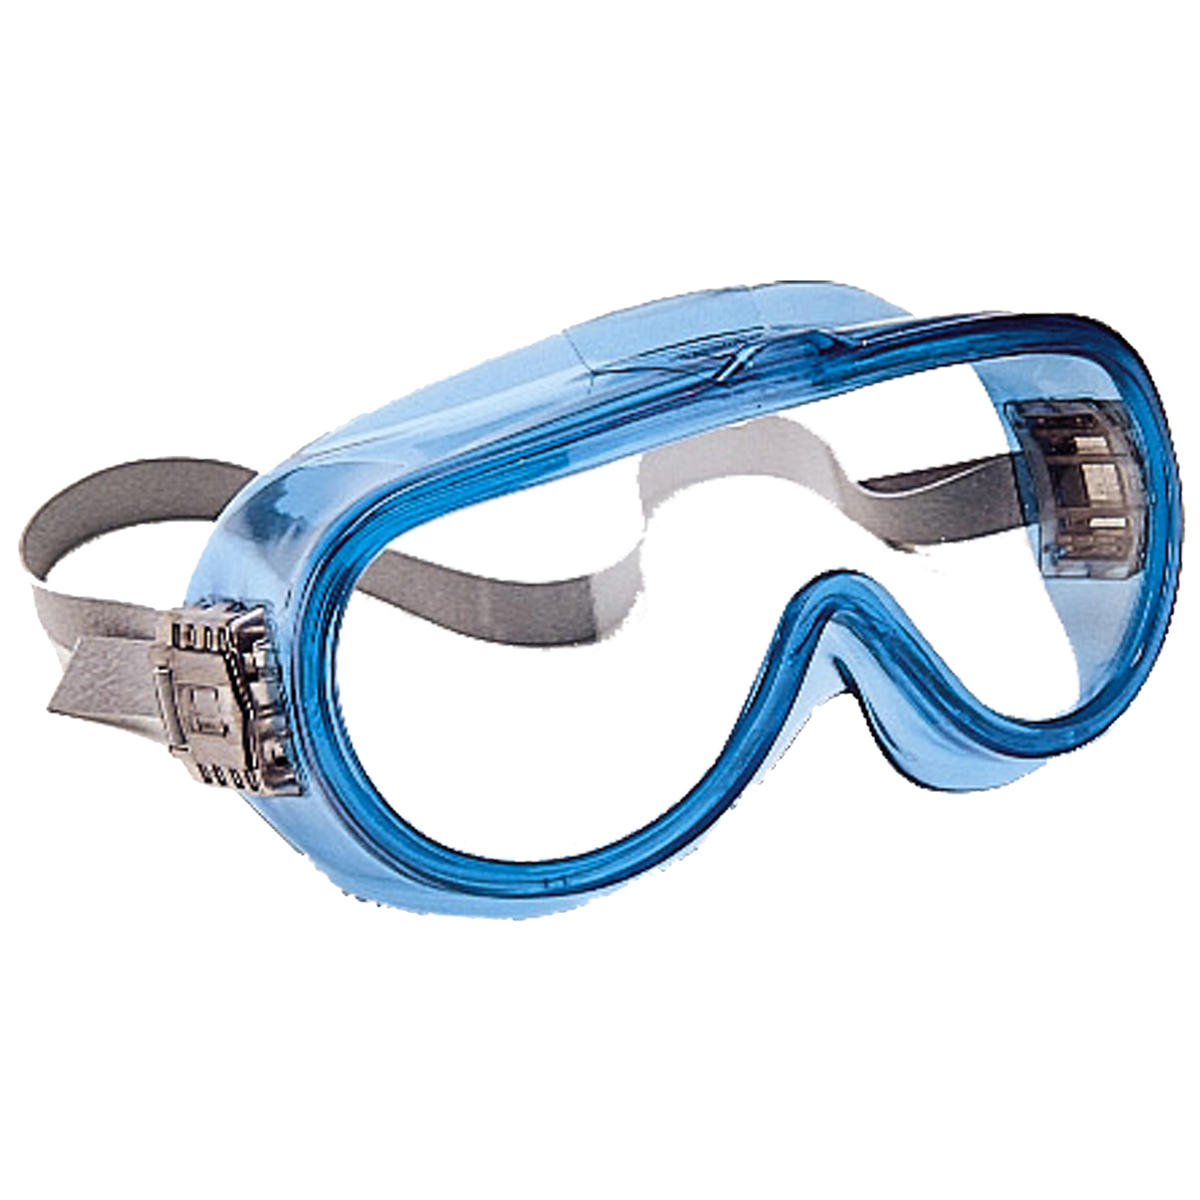 Kimberly-Clark Professional* KleenGuard™ MRXV* Unvented Splash Goggles With Blue And Clear Hard Coat Lens (Availability restrict